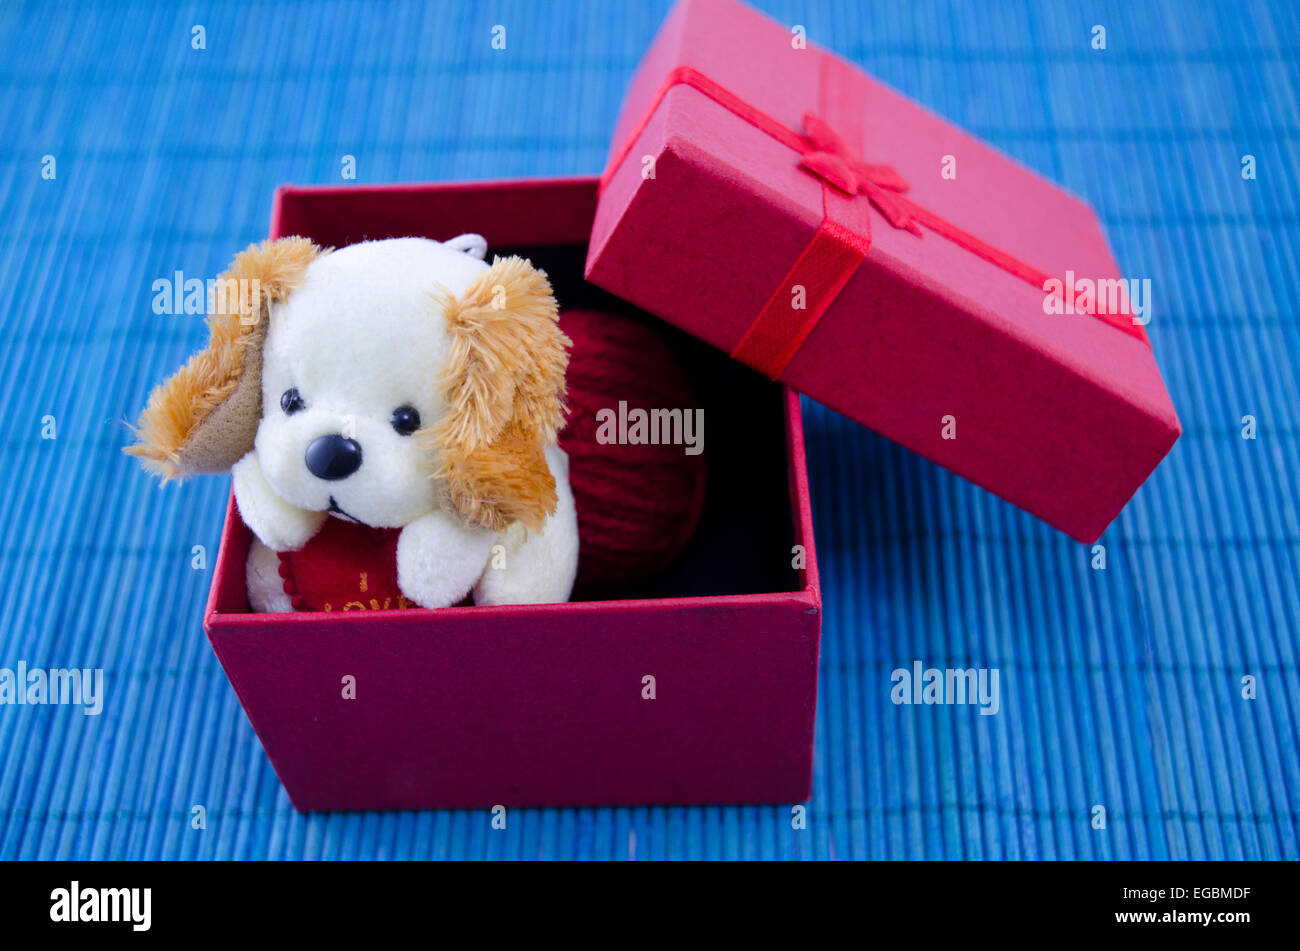 A toy dog in a red present box with a ribbon, on blue background Stock Photo